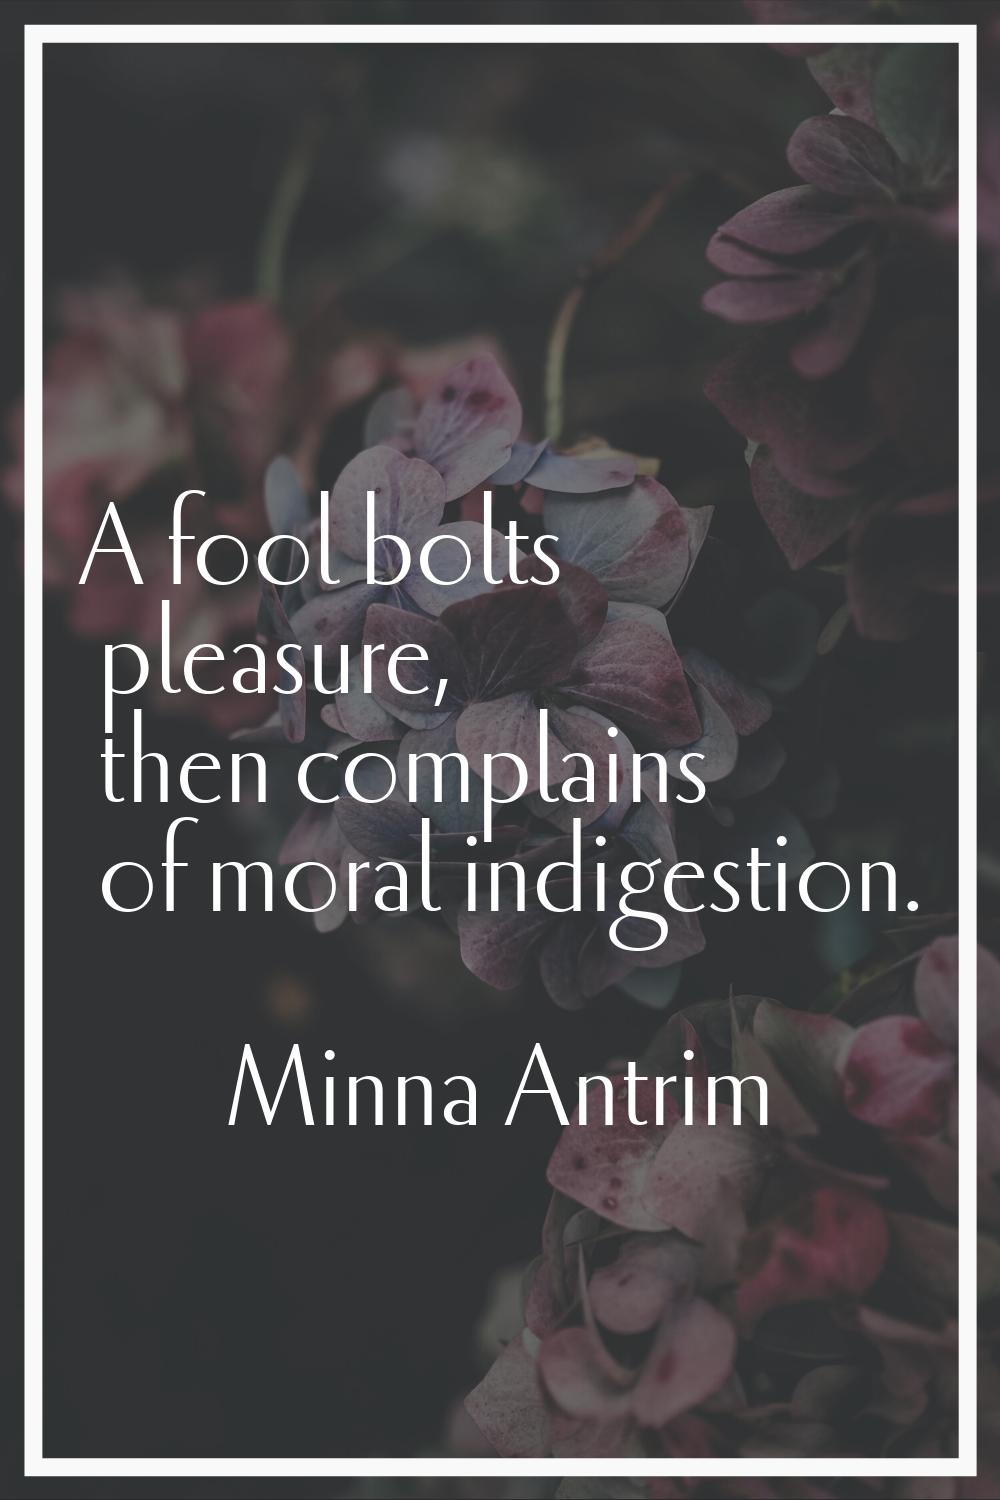 A fool bolts pleasure, then complains of moral indigestion.